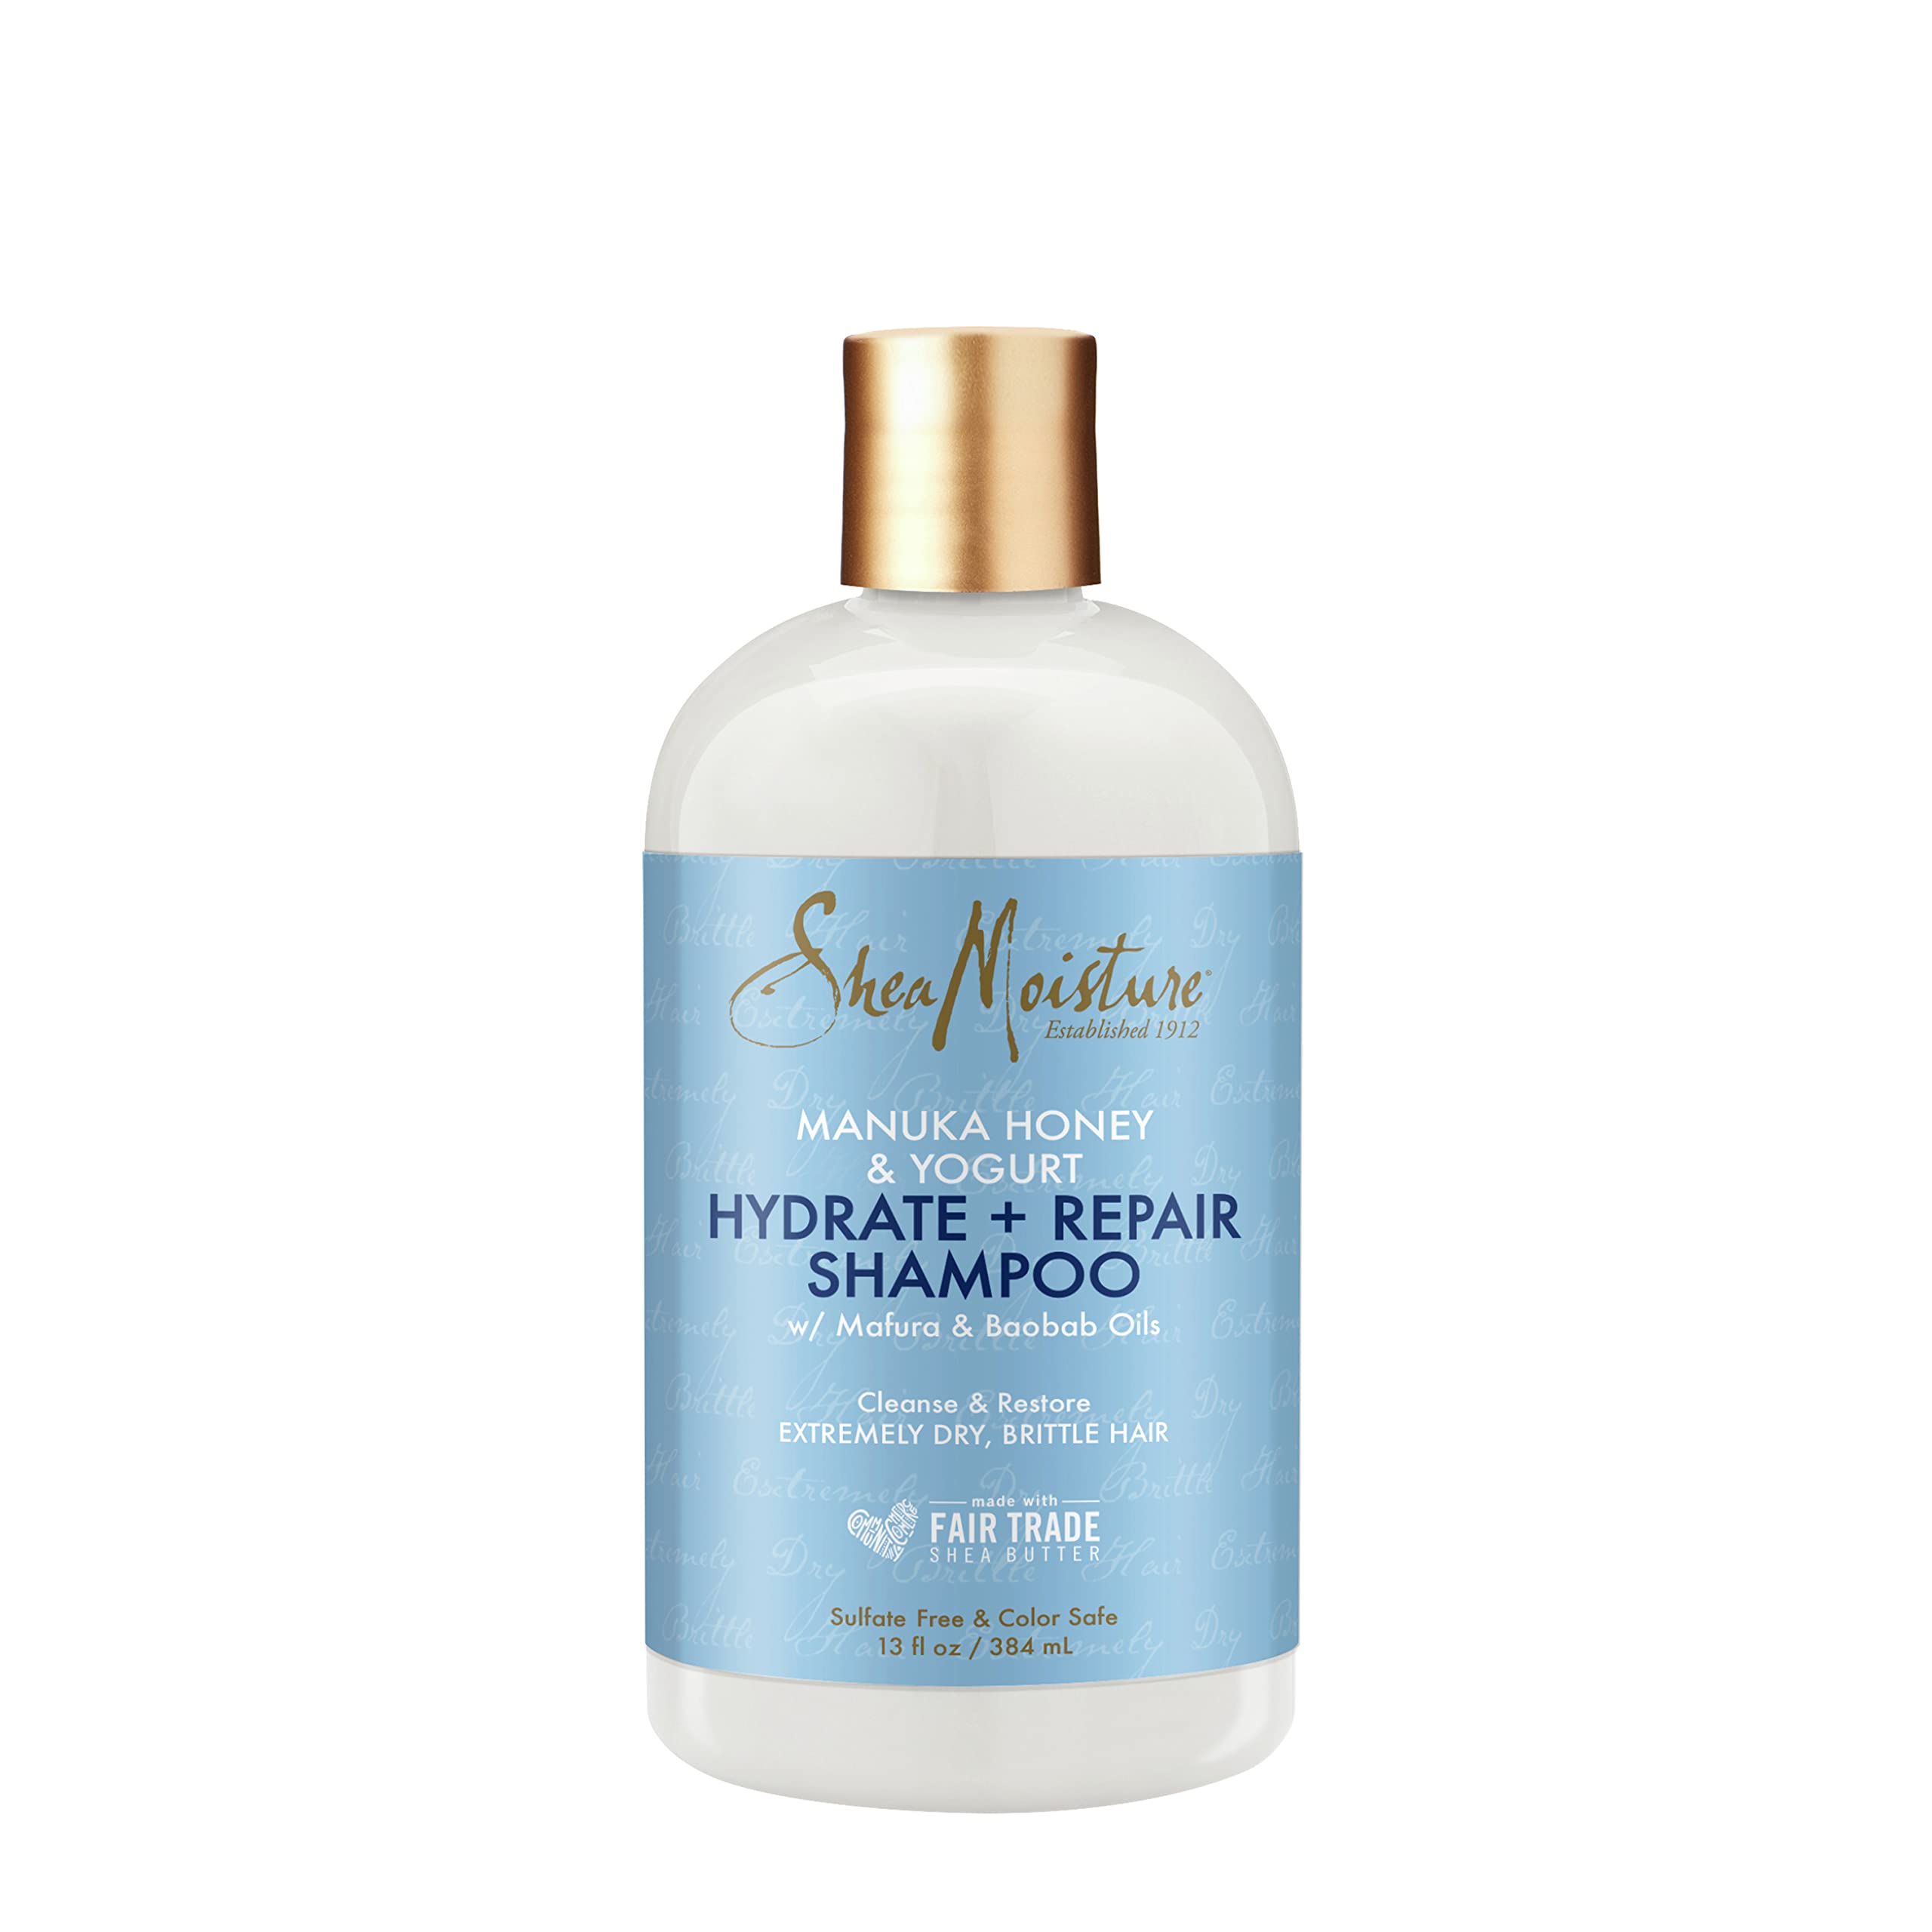 SheaMoisture Shampoo Hydrate and Repair for Damaged Hair with Manuka Honey and Shea Butter 13 oz